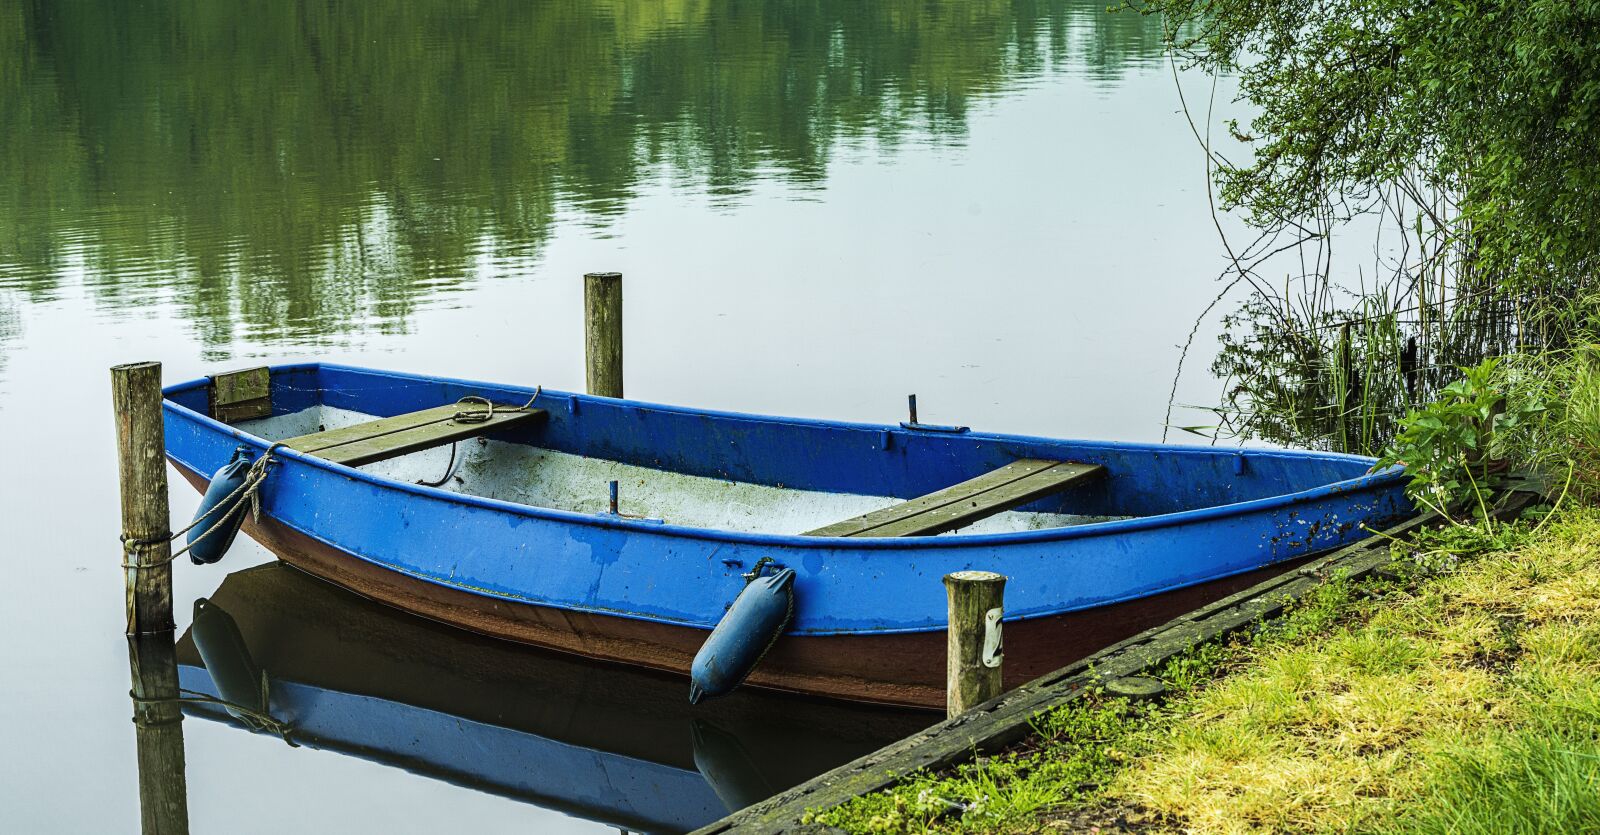 Sony a7R IV sample photo. Lake, boat, nature photography